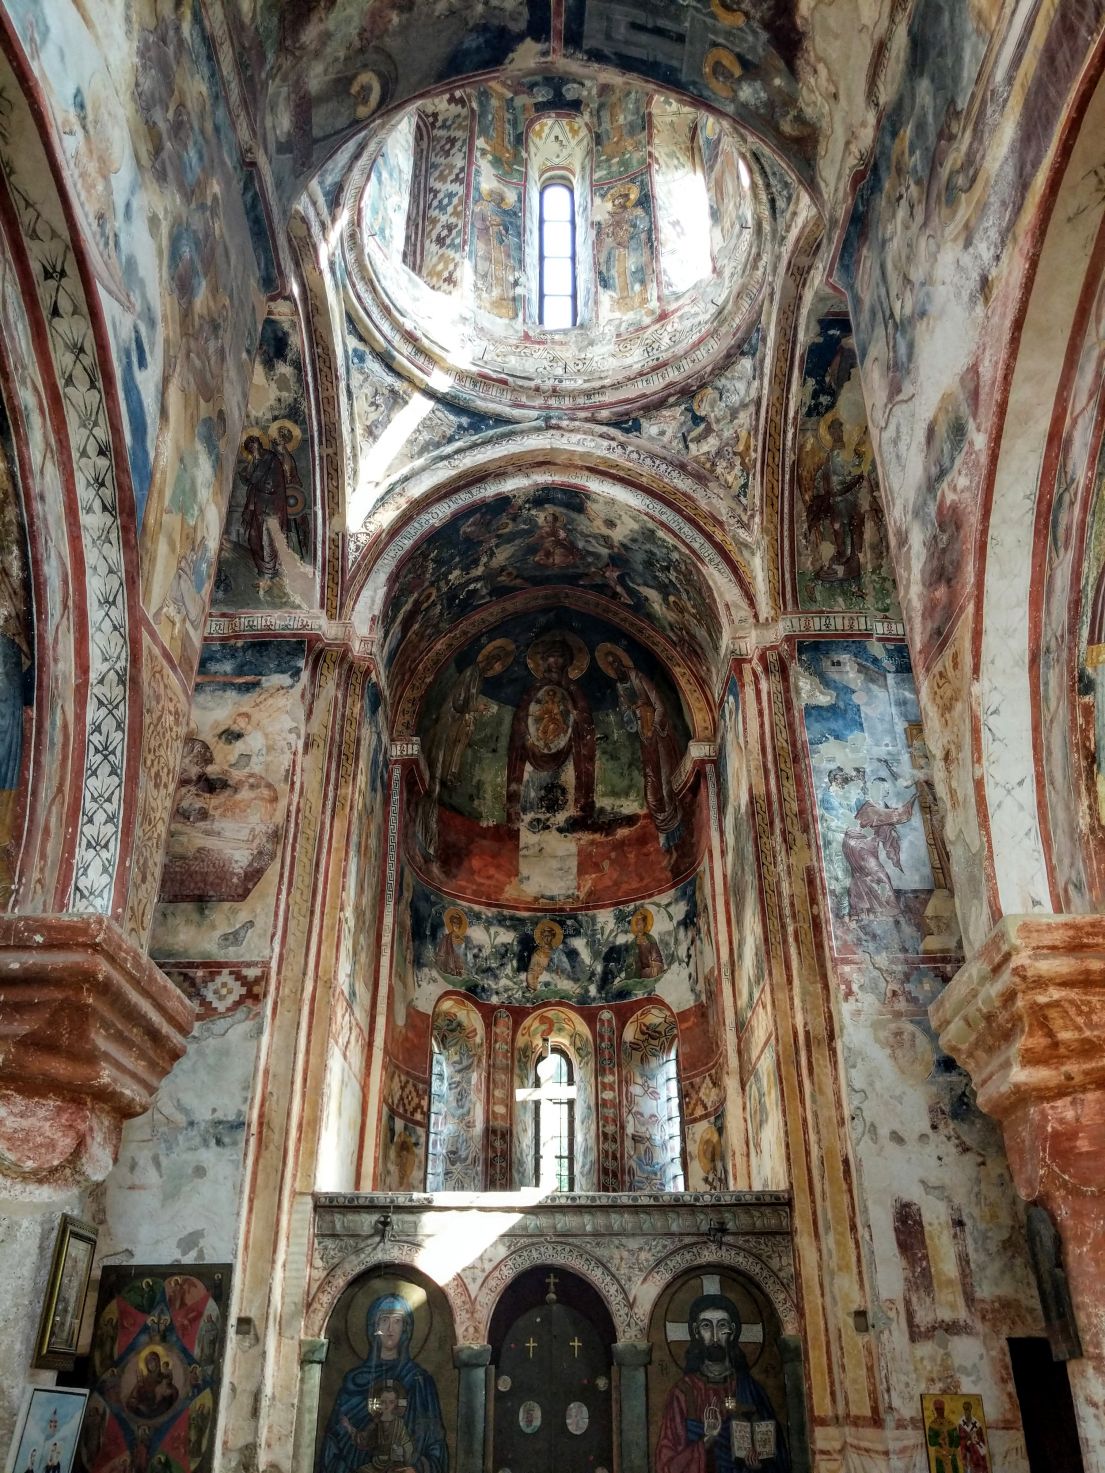 An elaborately decorated interior of a church with religious paintings.